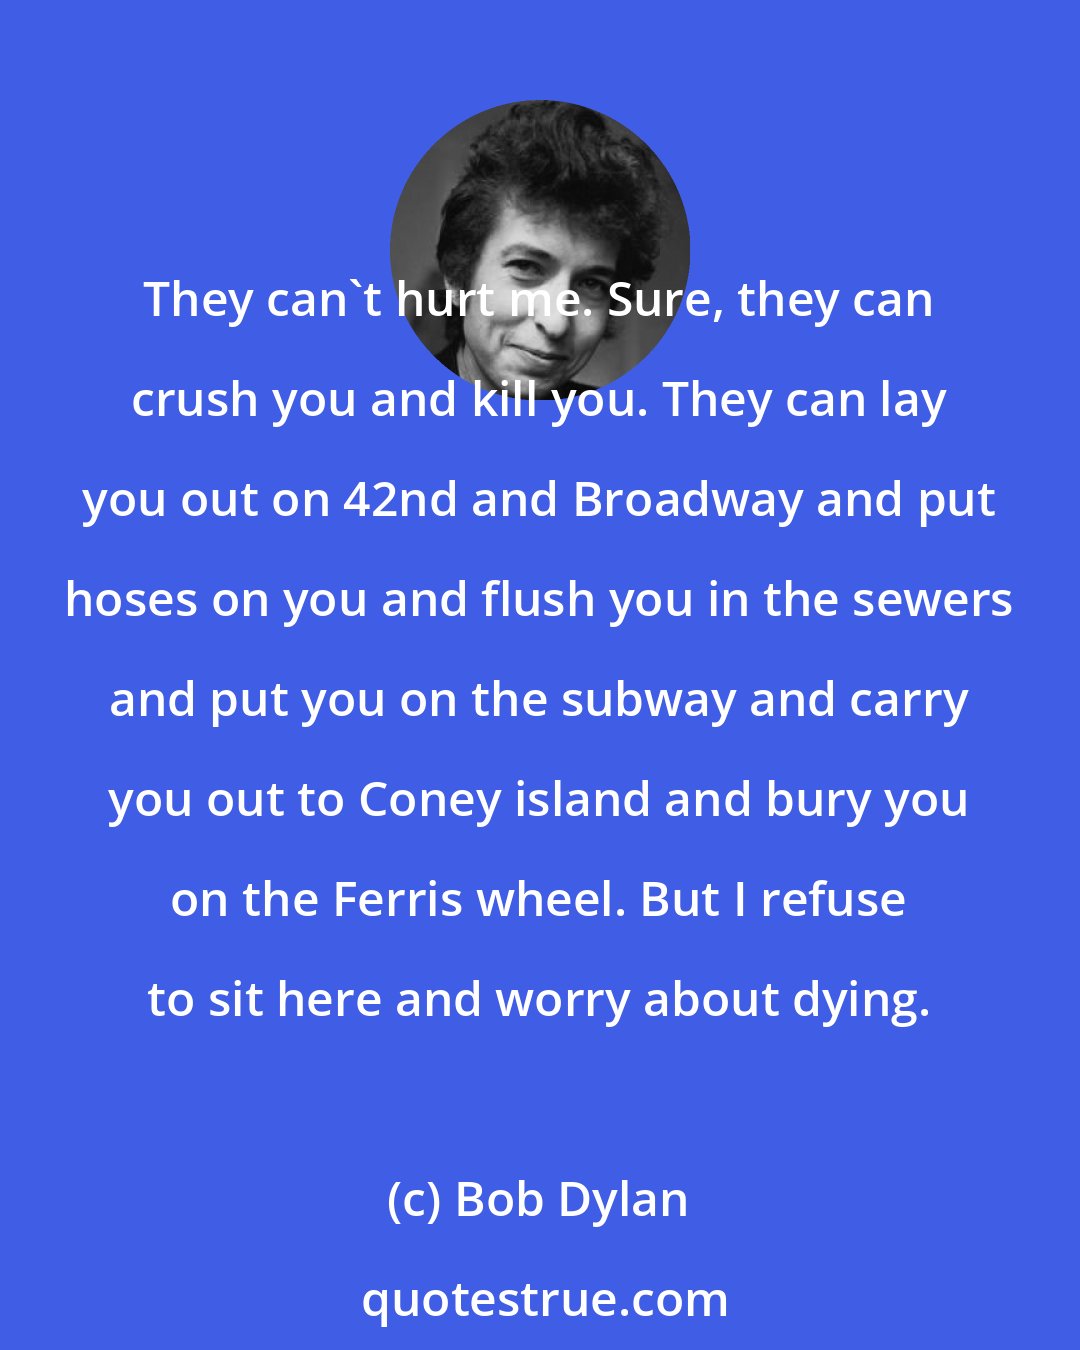 Bob Dylan: They can't hurt me. Sure, they can crush you and kill you. They can lay you out on 42nd and Broadway and put hoses on you and flush you in the sewers and put you on the subway and carry you out to Coney island and bury you on the Ferris wheel. But I refuse to sit here and worry about dying.